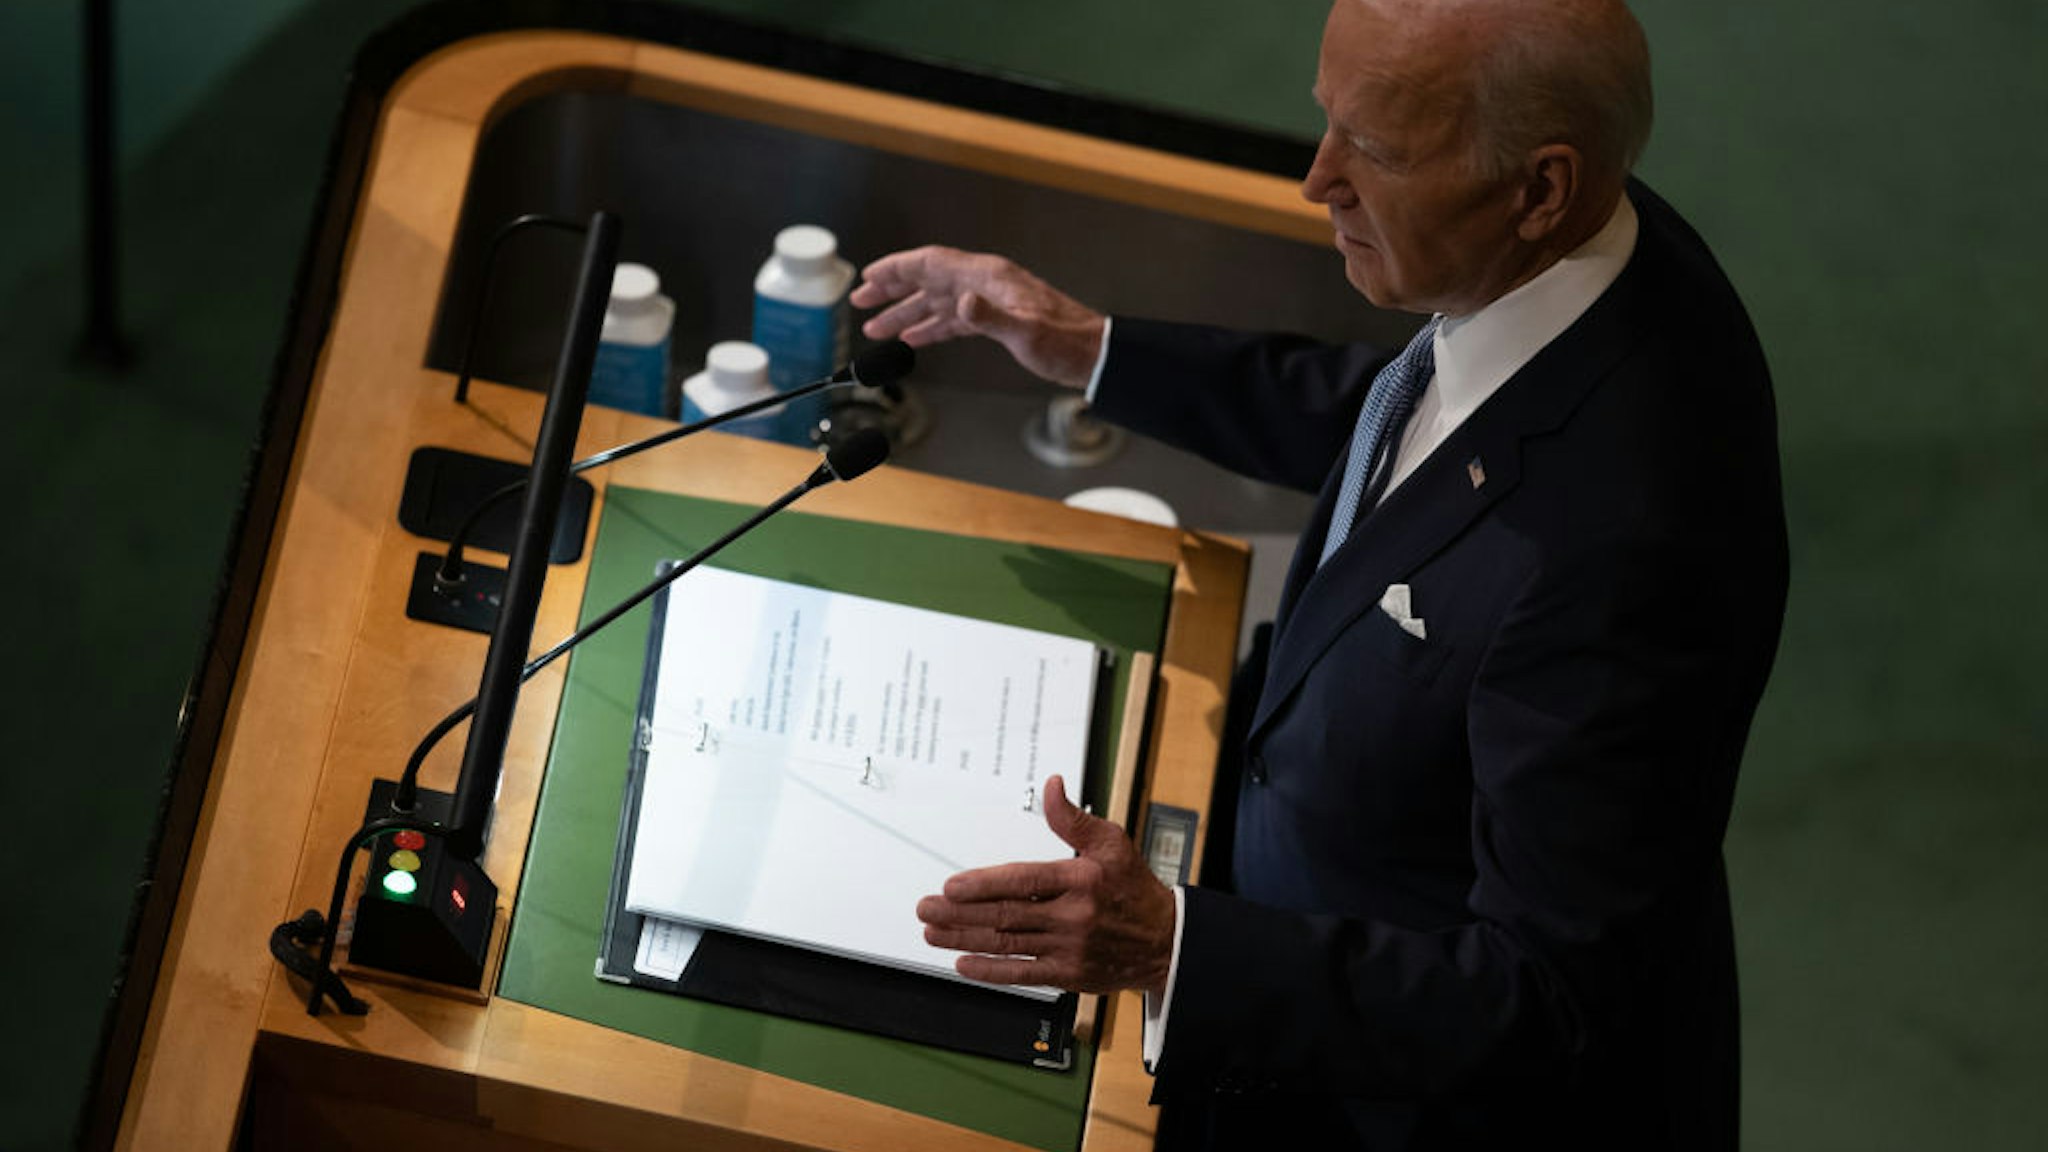 NEW YORK, USA - SEPTEMER 21: US President Joe Biden addresses during the 77th session of the United Nations General Assembly (UNGA) at UN Headquarters in New York, United States on September 21, 2022. (Photo by